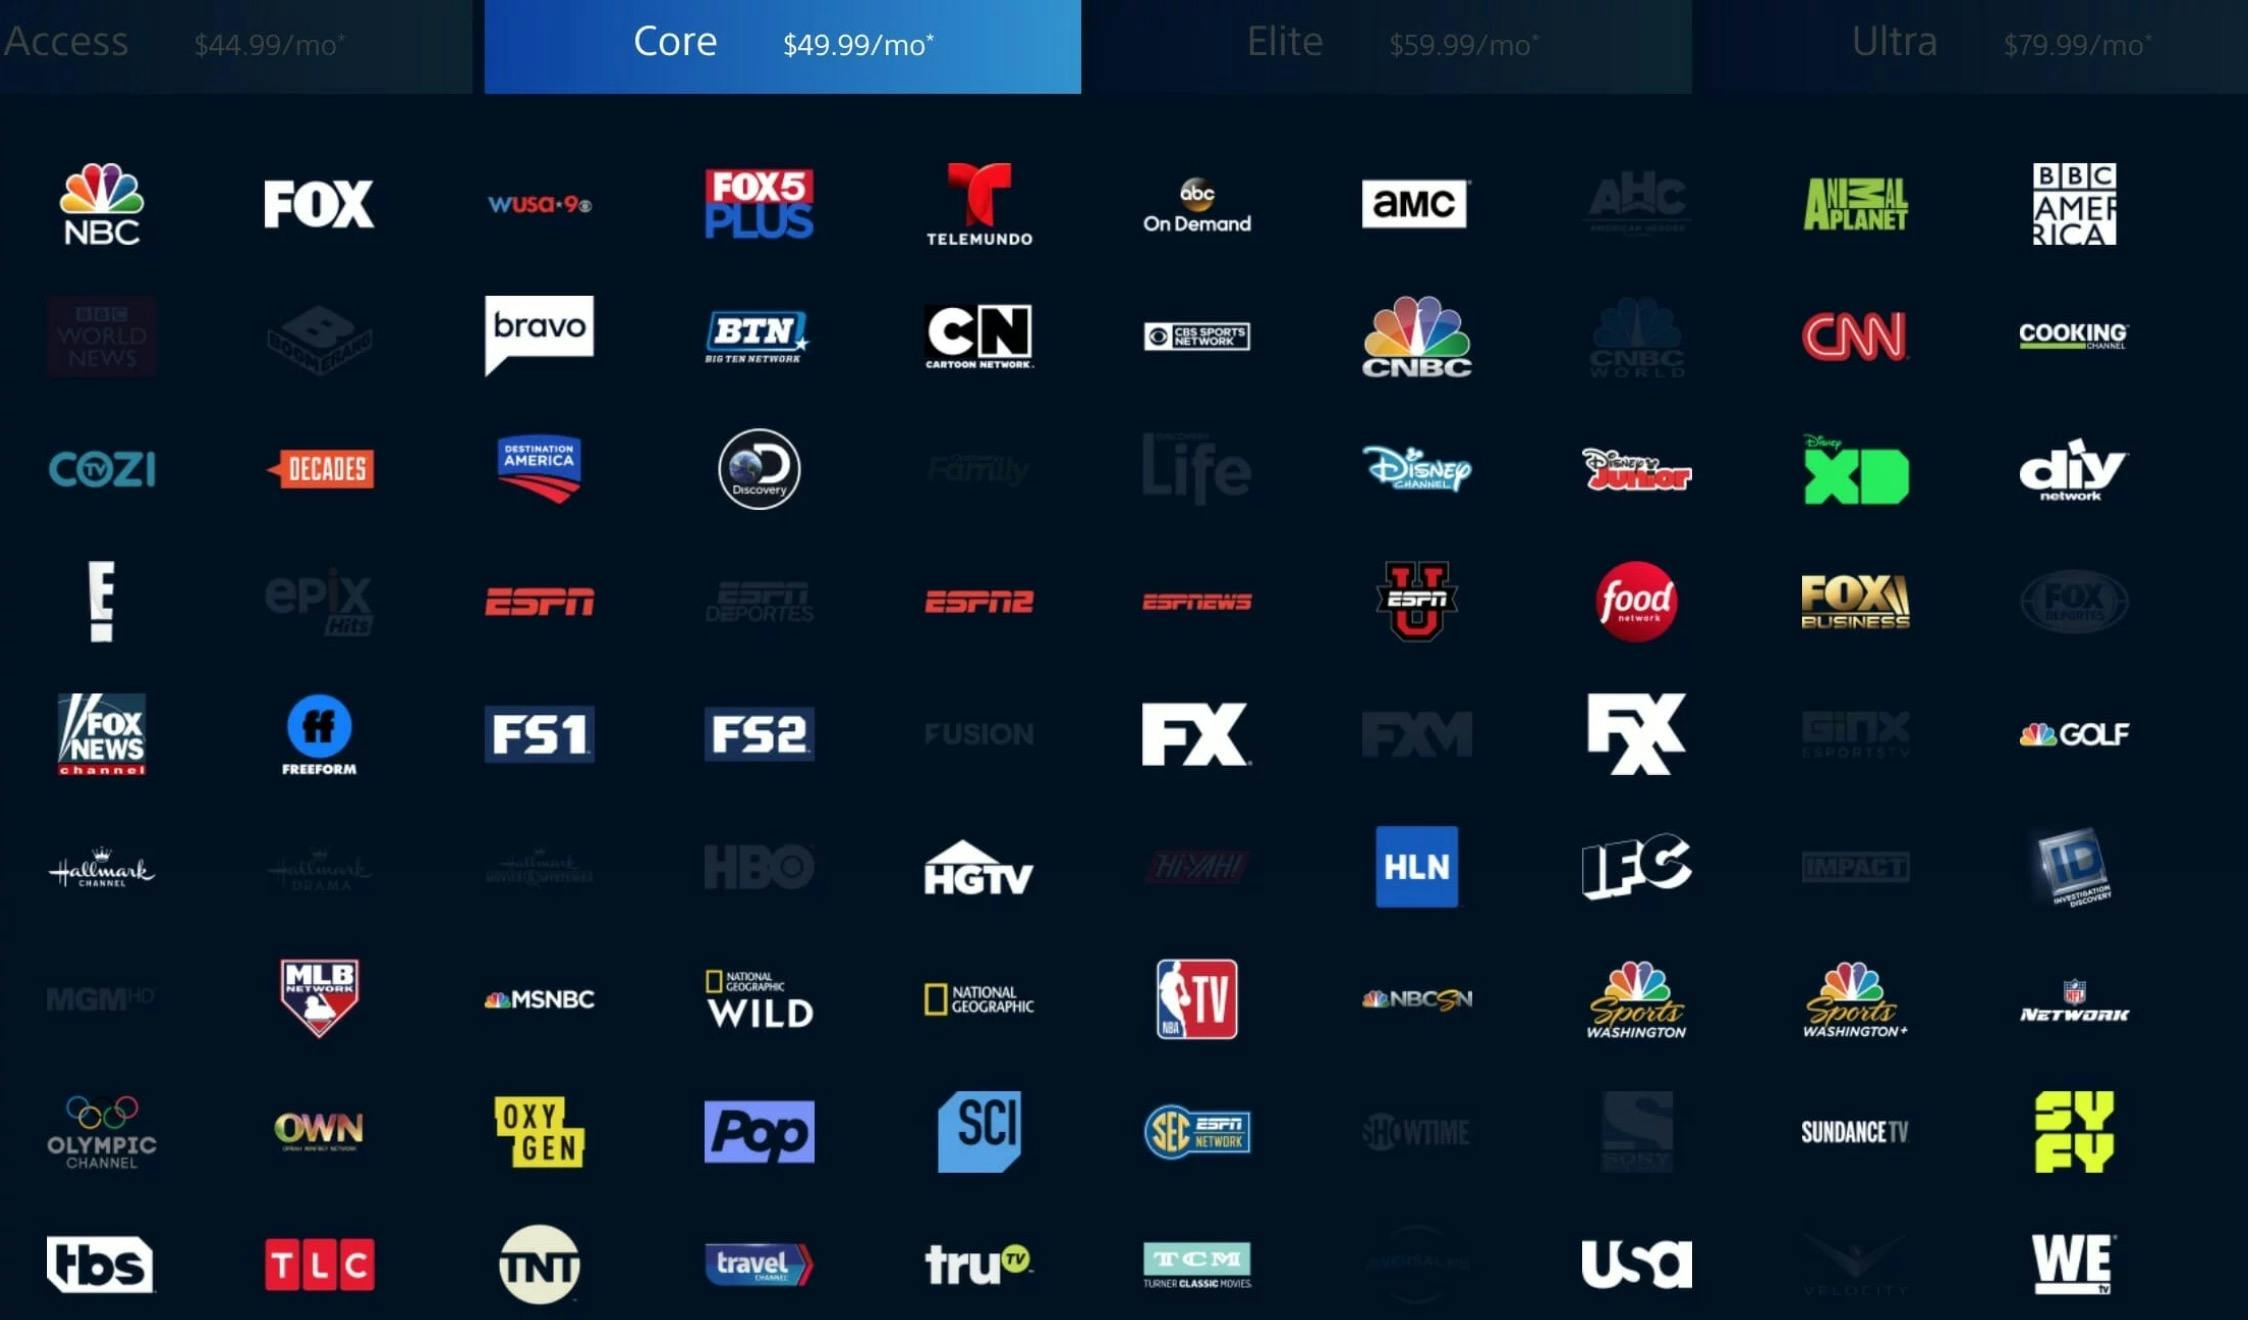 2019 mls all star game orlando atletico madrid soccer live stream free playstation vue core